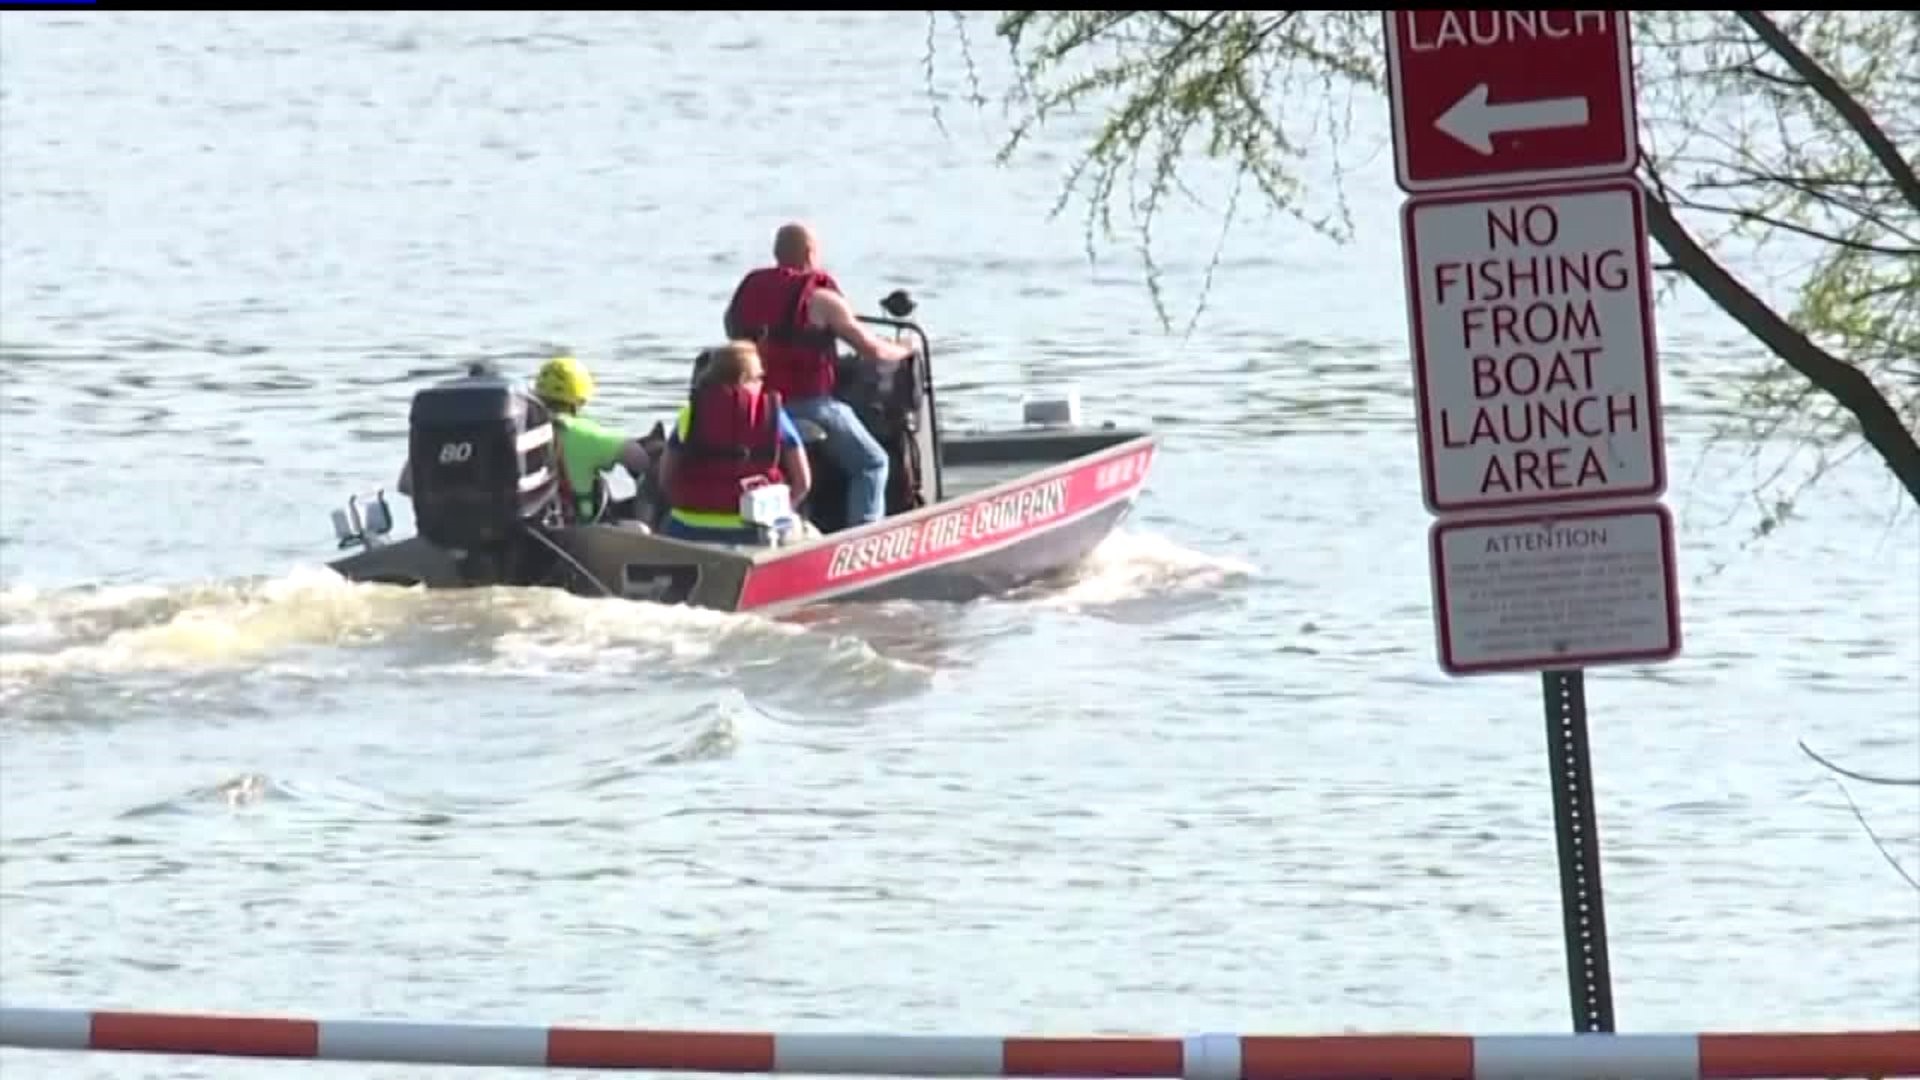 Crews are expected to continue their search for a 3 year old girl that went missing after a boat capsized on the Susquehanna River